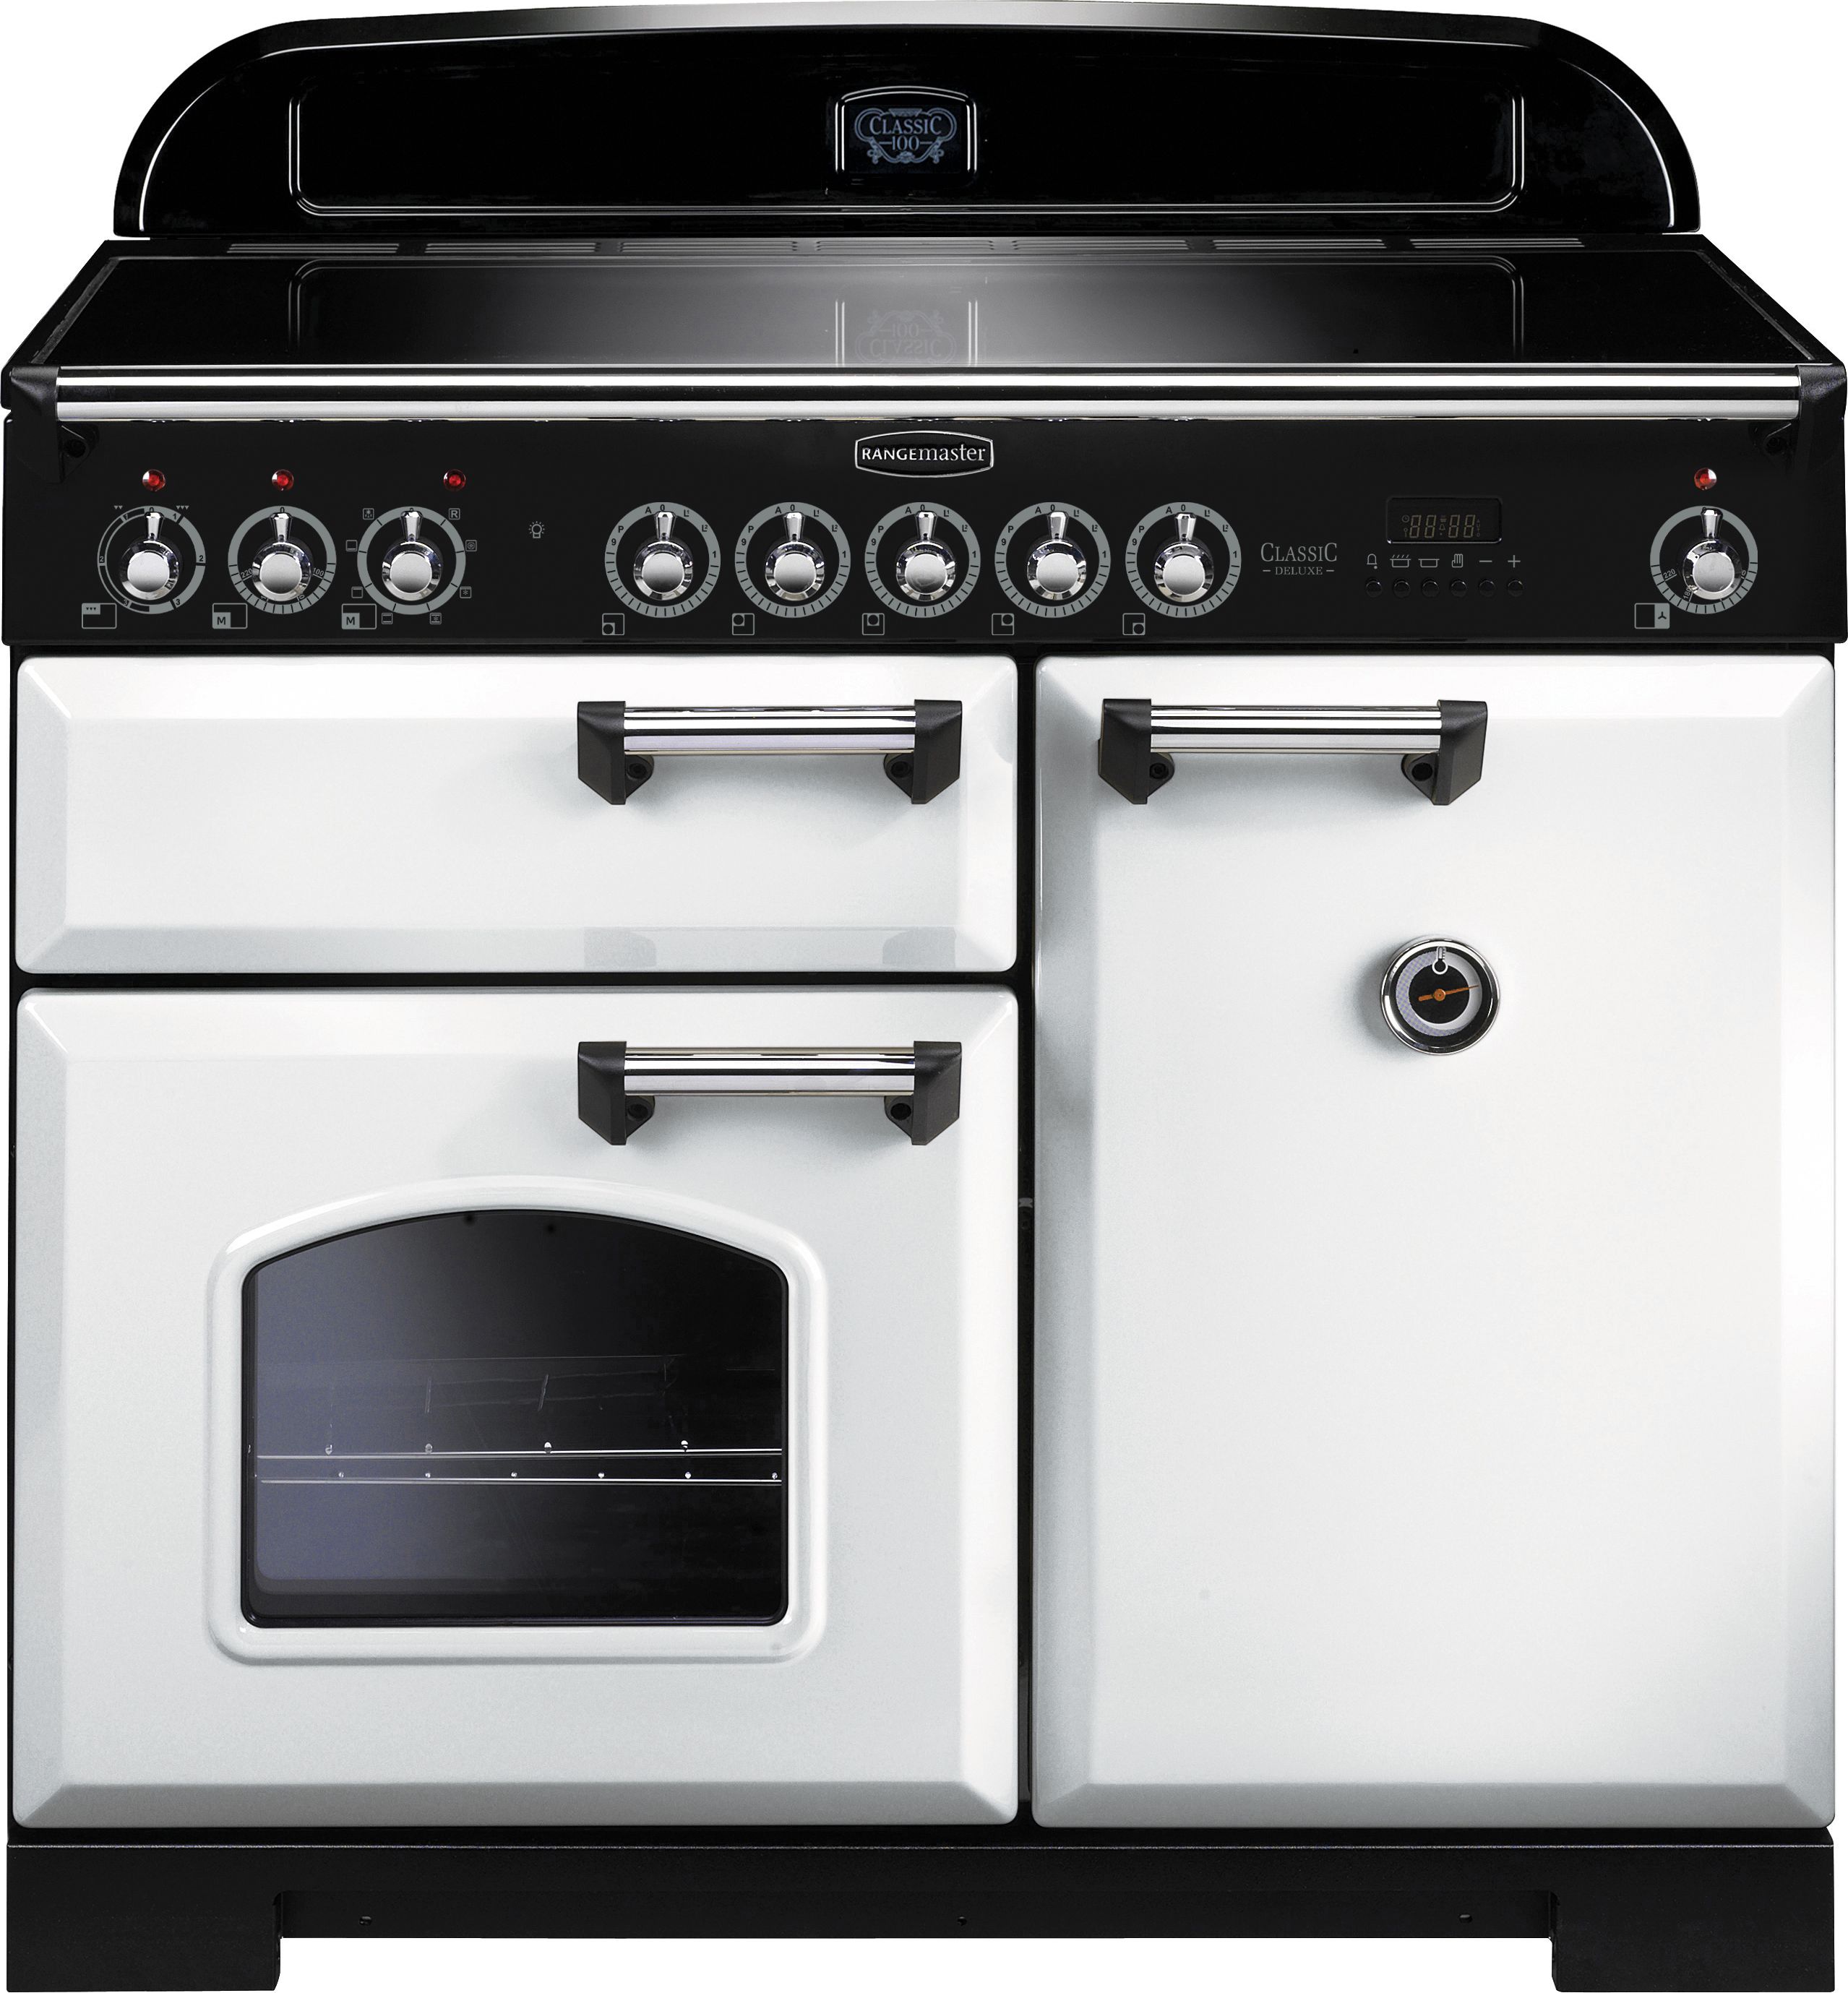 Rangemaster Classic Deluxe CDL100EIWH/C 100cm Electric Range Cooker with Induction Hob - White / Chrome - A/A Rated, White